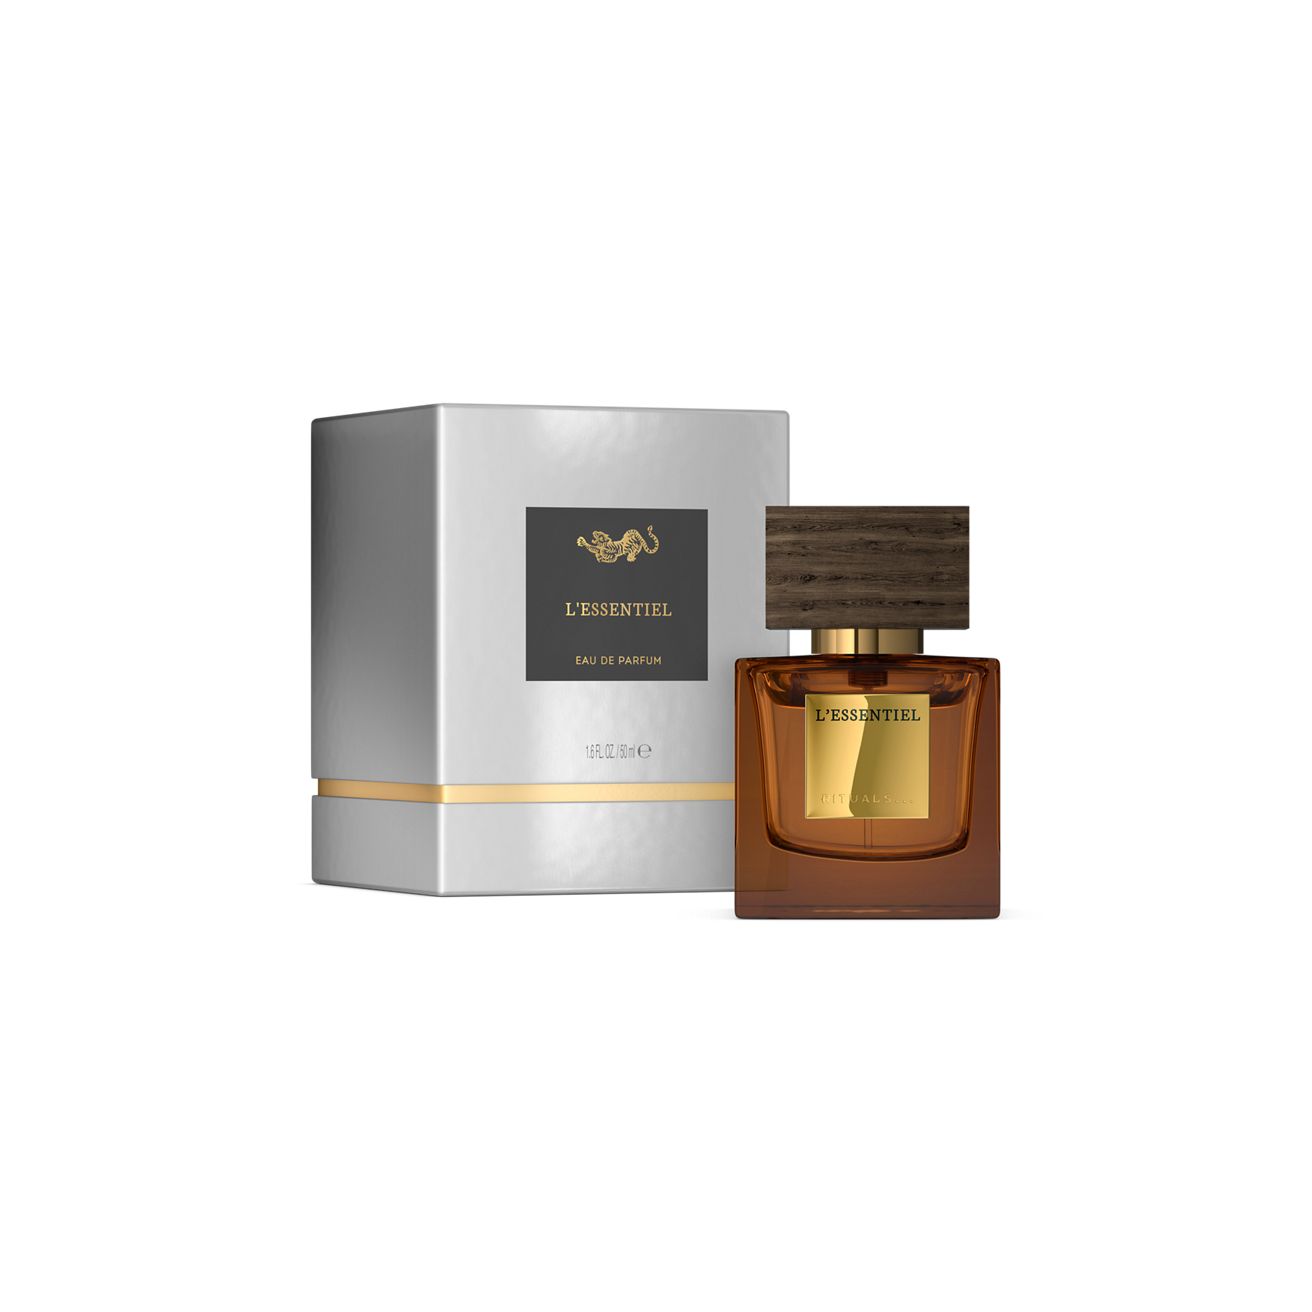 L'Essentiel by Rituals » Reviews & Perfume Facts